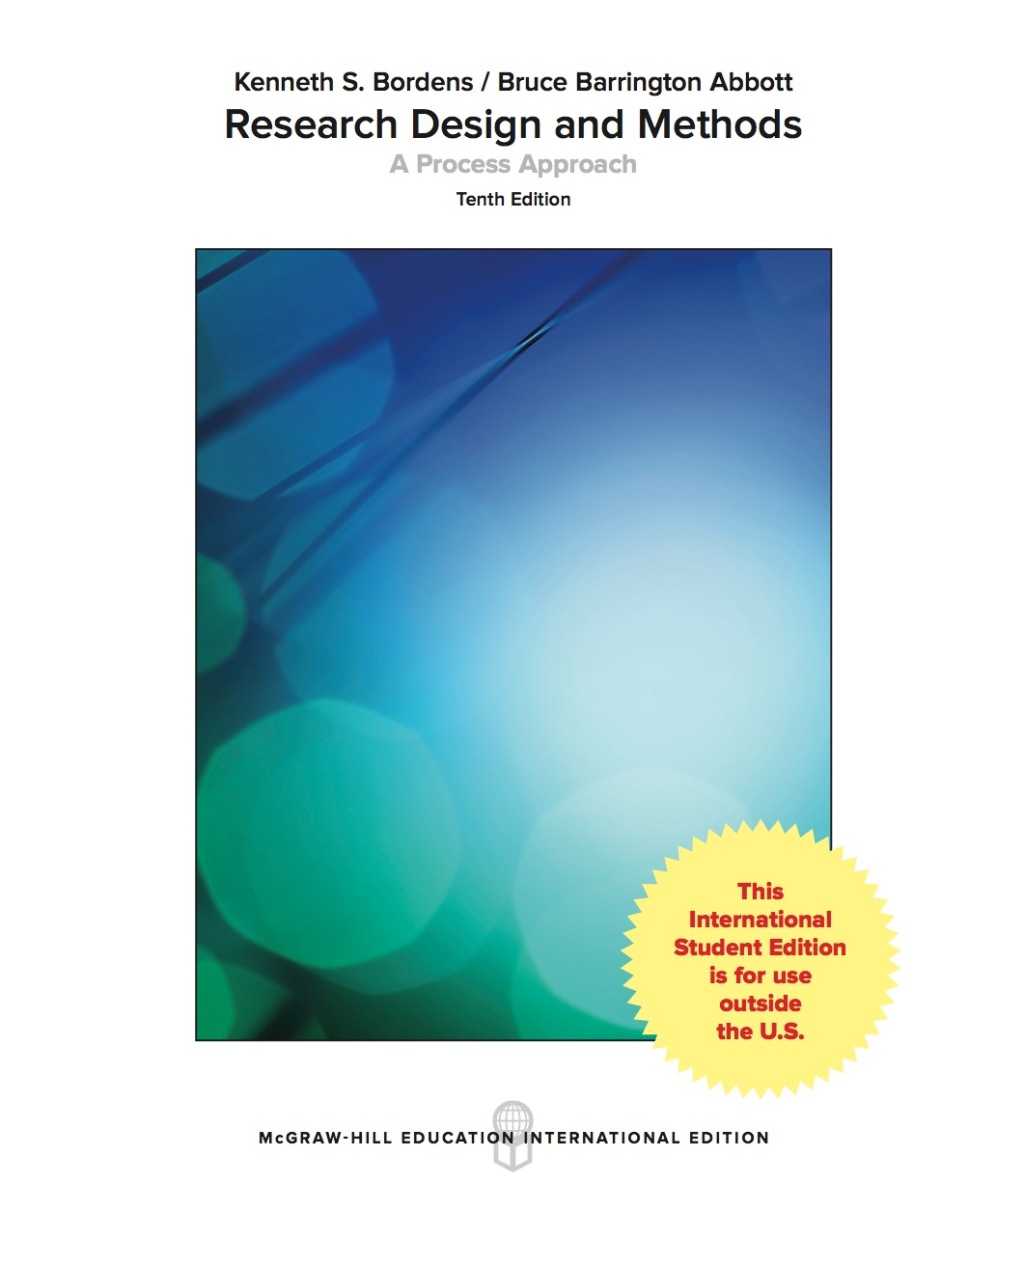 Research Design and Methods: A Process Approach - 10th Edition (eBook Rental)